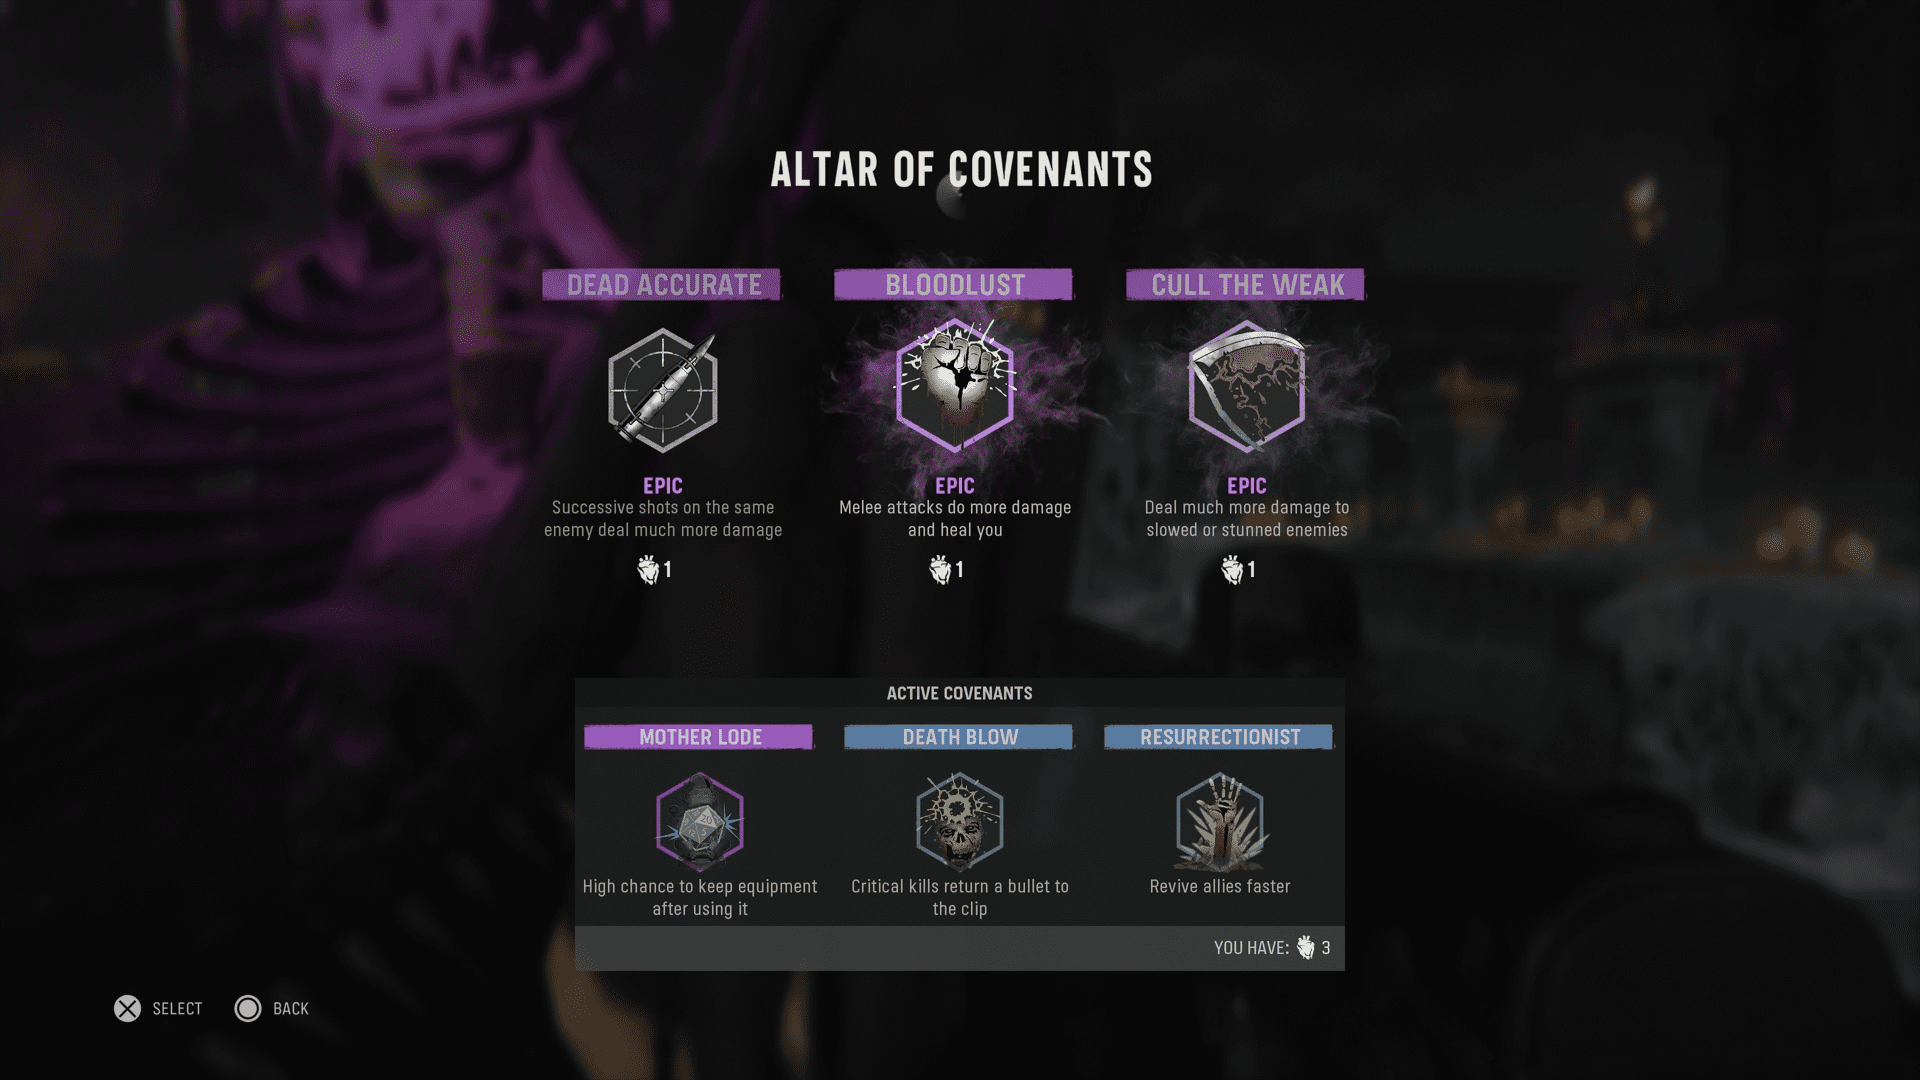 The Altar of Covenants in Zombies